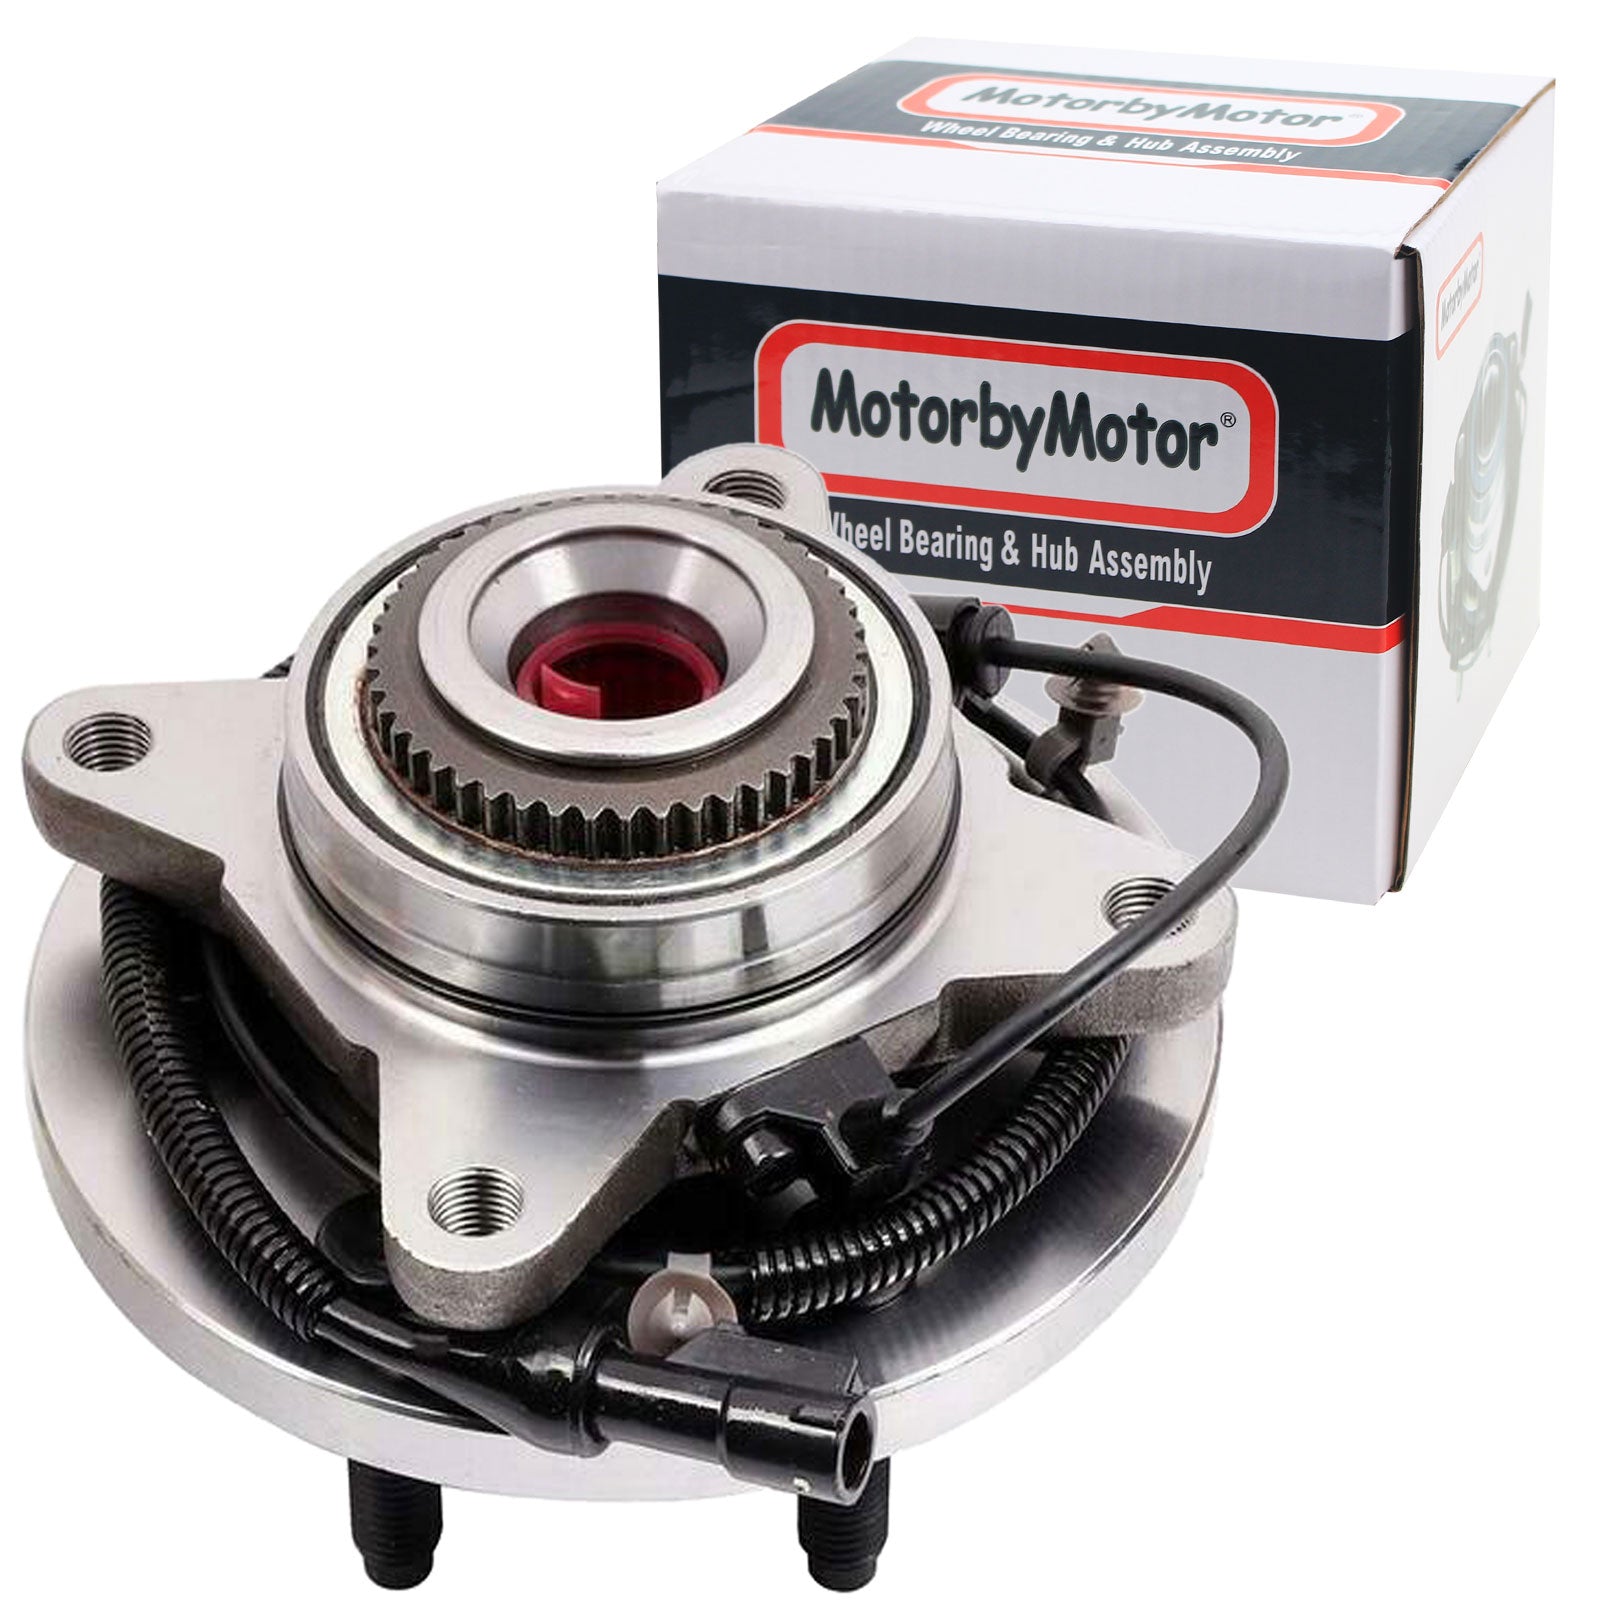 MotorbyMotor 515119 (4WD) Front Wheel Bearing and Hub Assembly 4WD with 6 Lugs Fits for 2009 2010 Ford F-150 (Not for Heavy Duty Payload Models), Lincoln Navigator Hub Bearing (4WD 4x4, w/ABS) MotorbyMotor